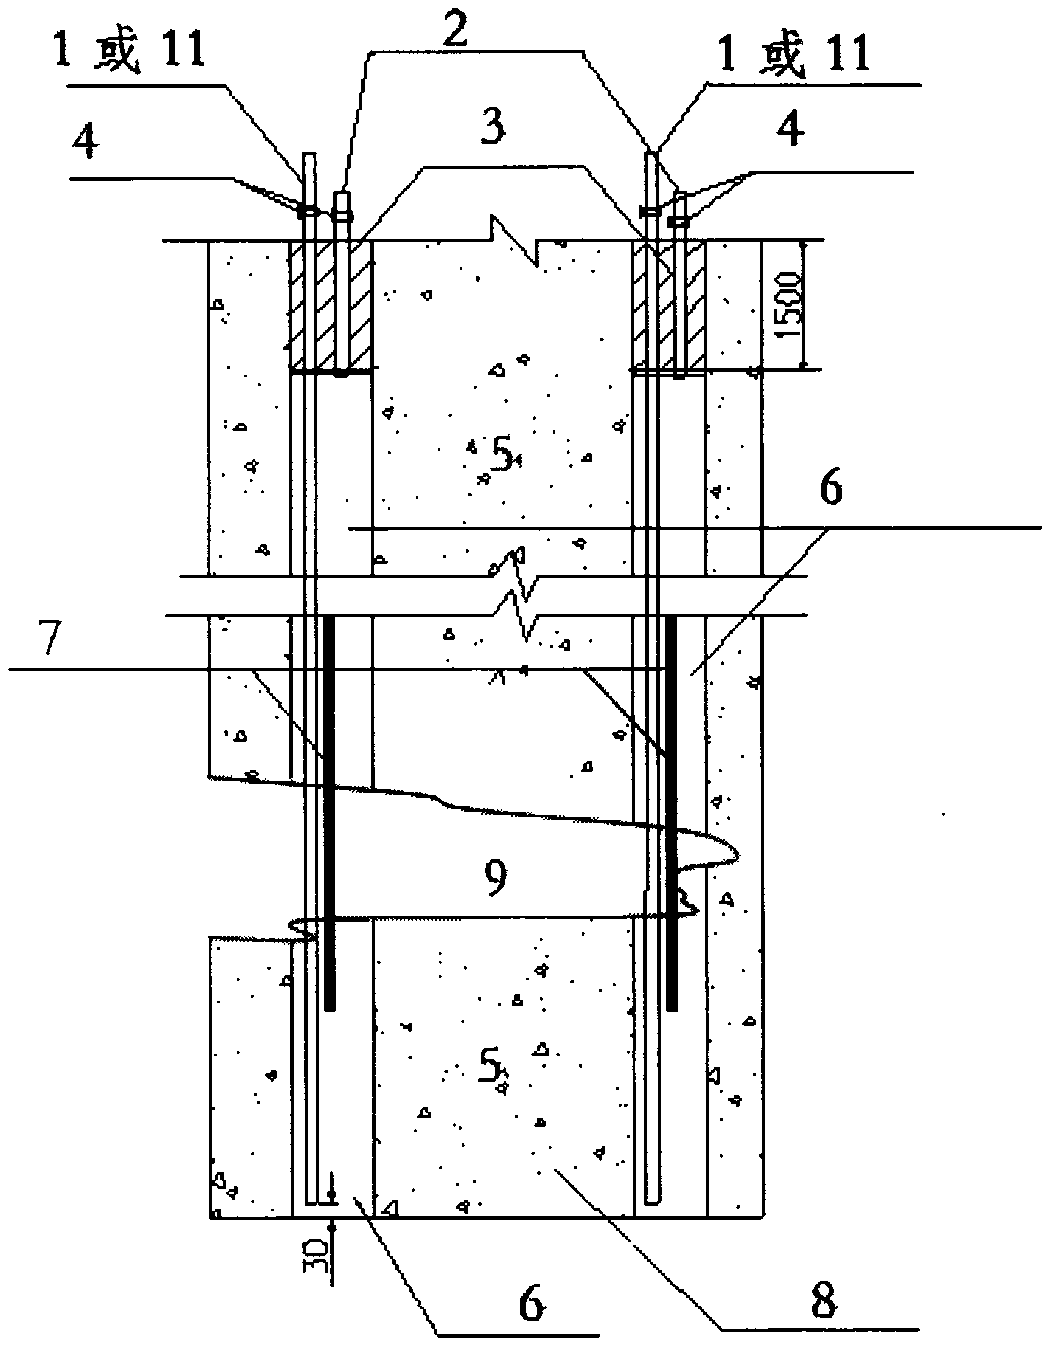 Construction method for the treatment of pile body collapse hole or pile bottom sediment quality defect of rotary excavated cast-in-place pile